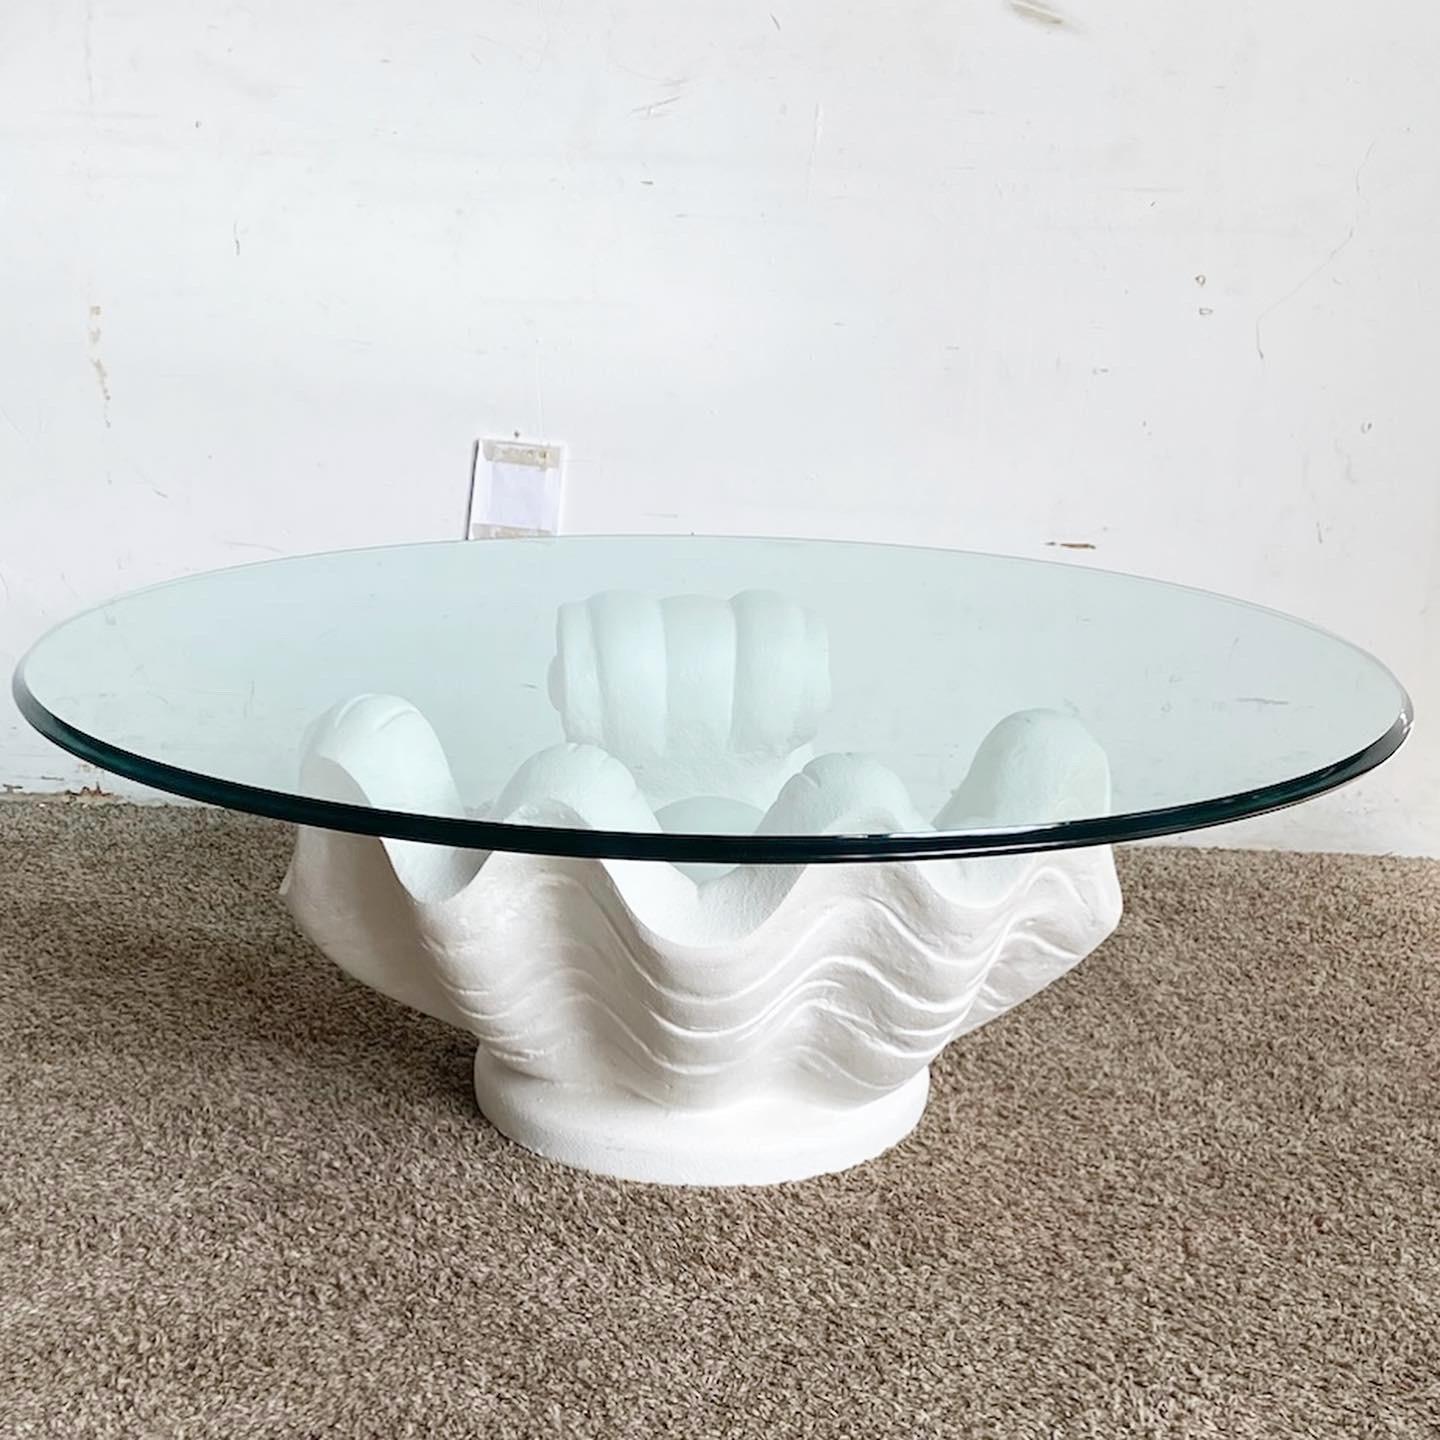 Regency Modern White Plaster Clam Shell Glass Top Coffee Table For Sale 2